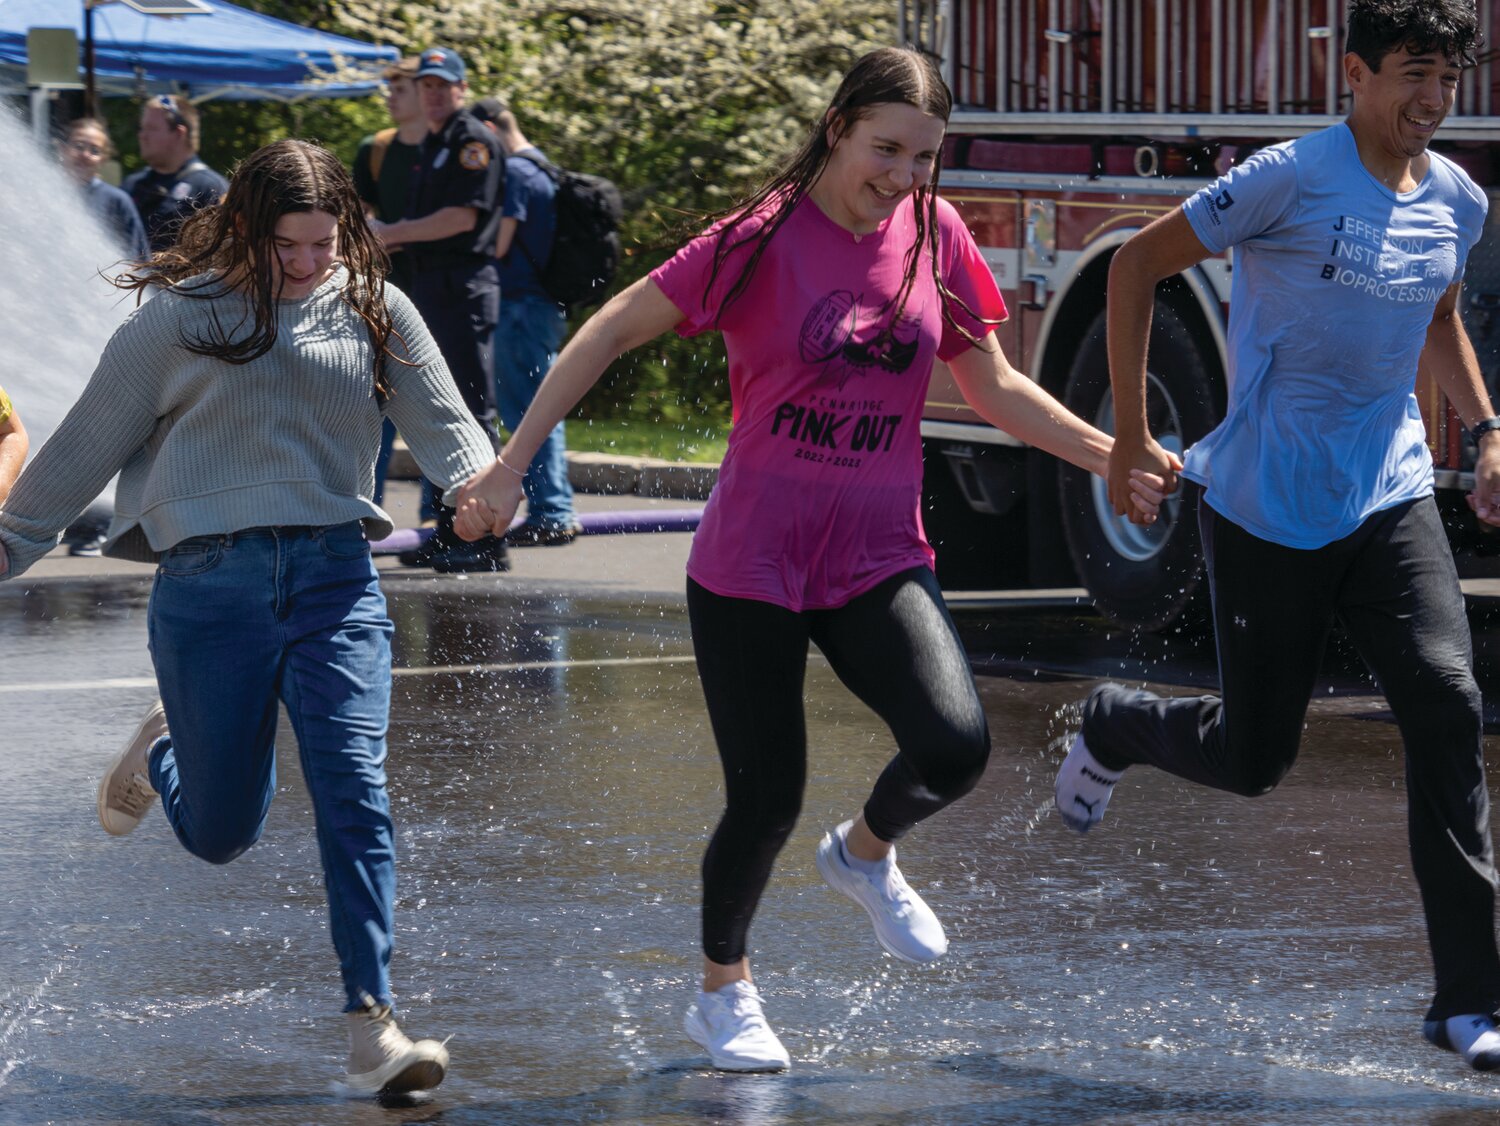 Students hold hands as they run through a deluge of water.